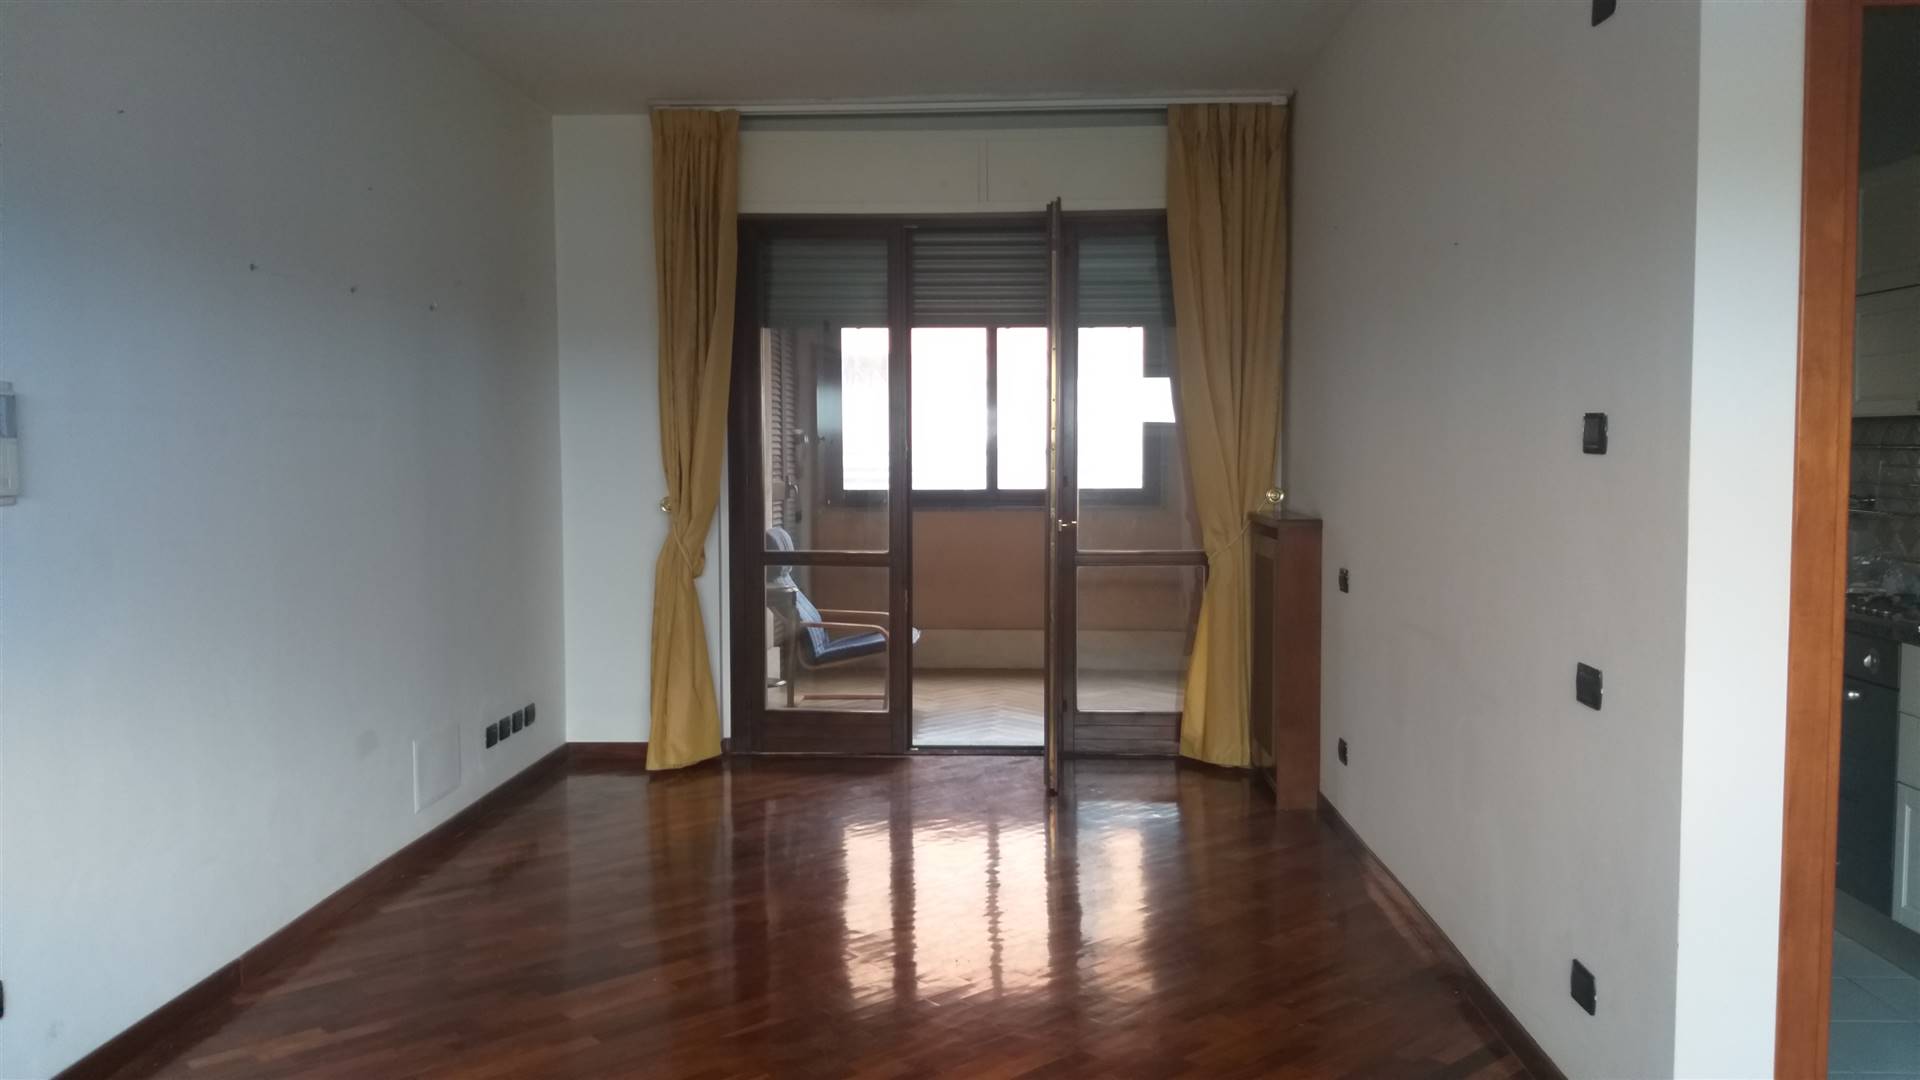 CENTRO 14, FIUMICINO, Apartment for sale, Excellent Condition, Heating Individual heating system, Energetic class: G, Epi: 175 kwh/m2 year, placed at 4° on 6, composed by: 2.5 Rooms, Little kitchen, ,